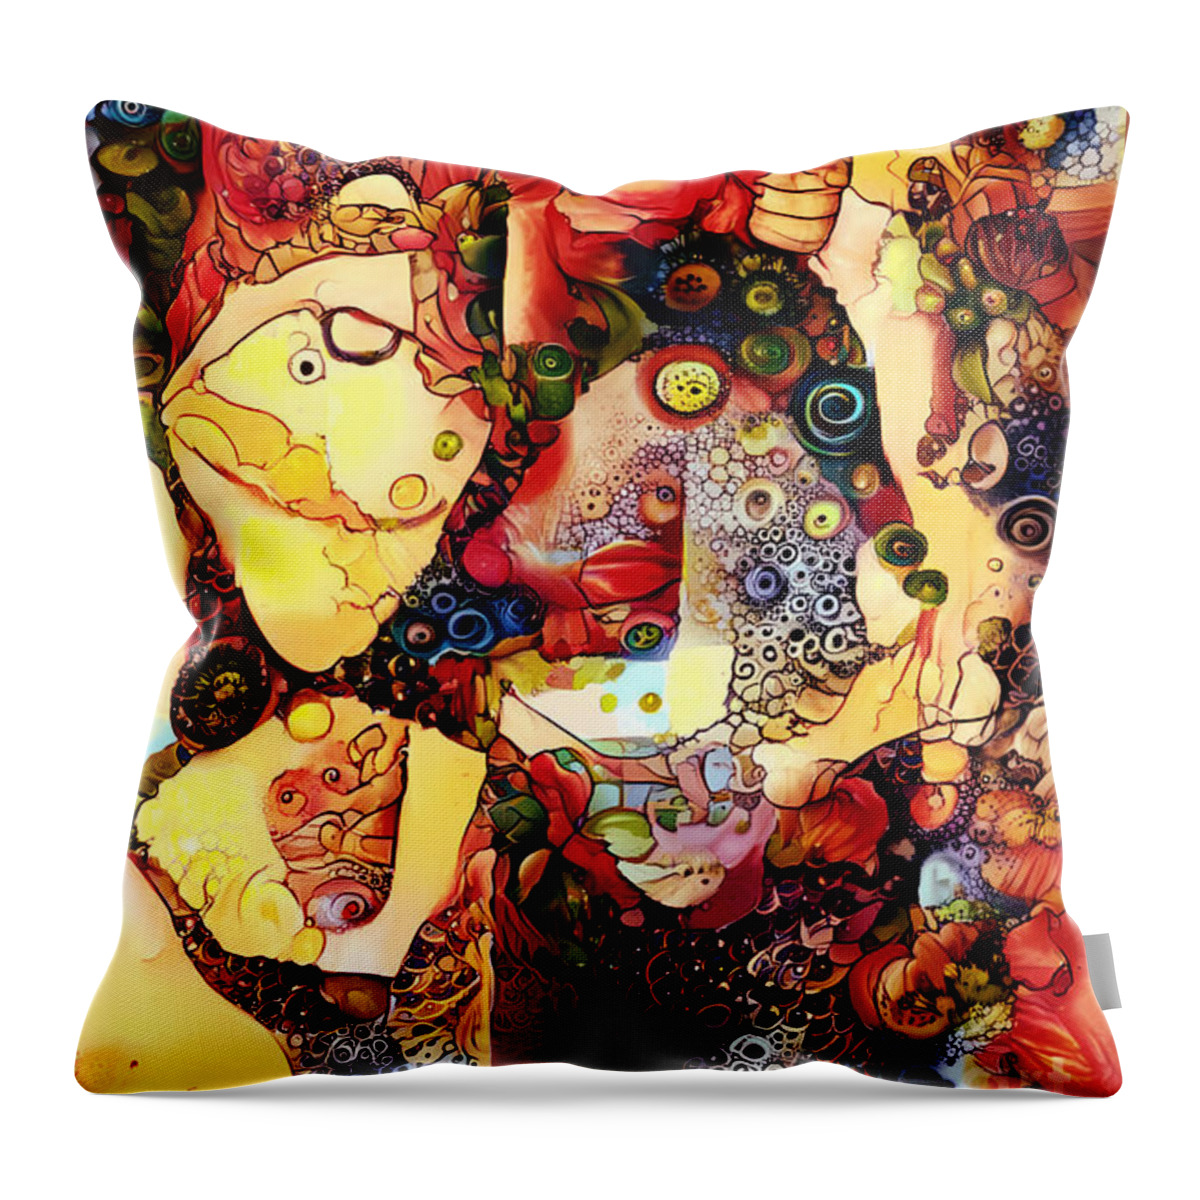 Contemporary Art Throw Pillow featuring the digital art 32 by Jeremiah Ray